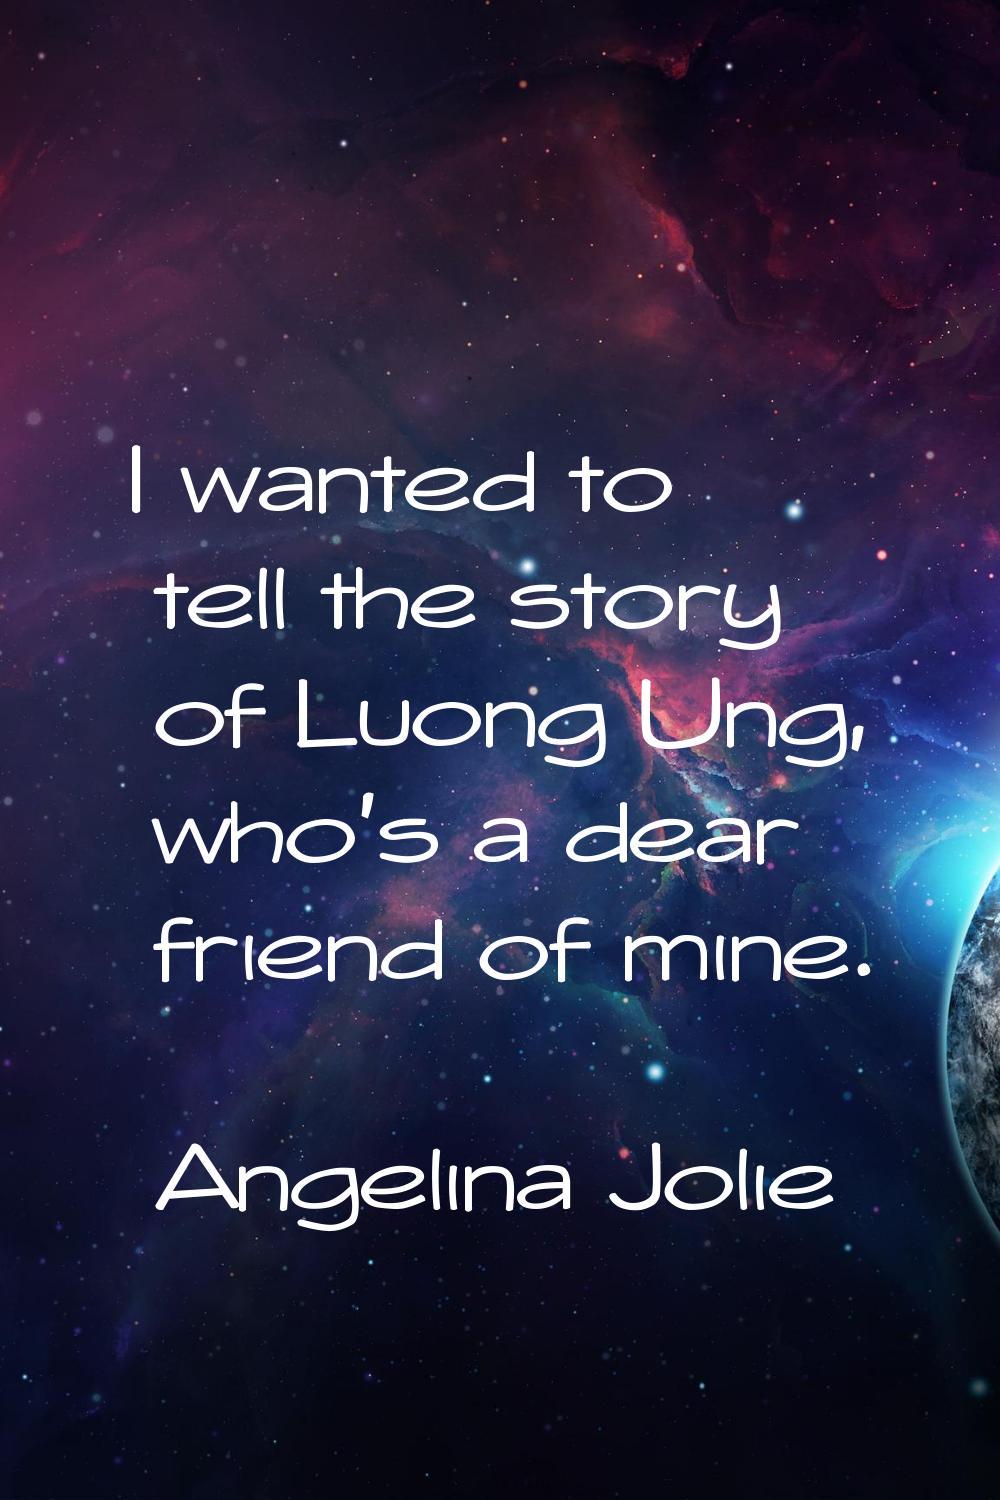 I wanted to tell the story of Luong Ung, who's a dear friend of mine.